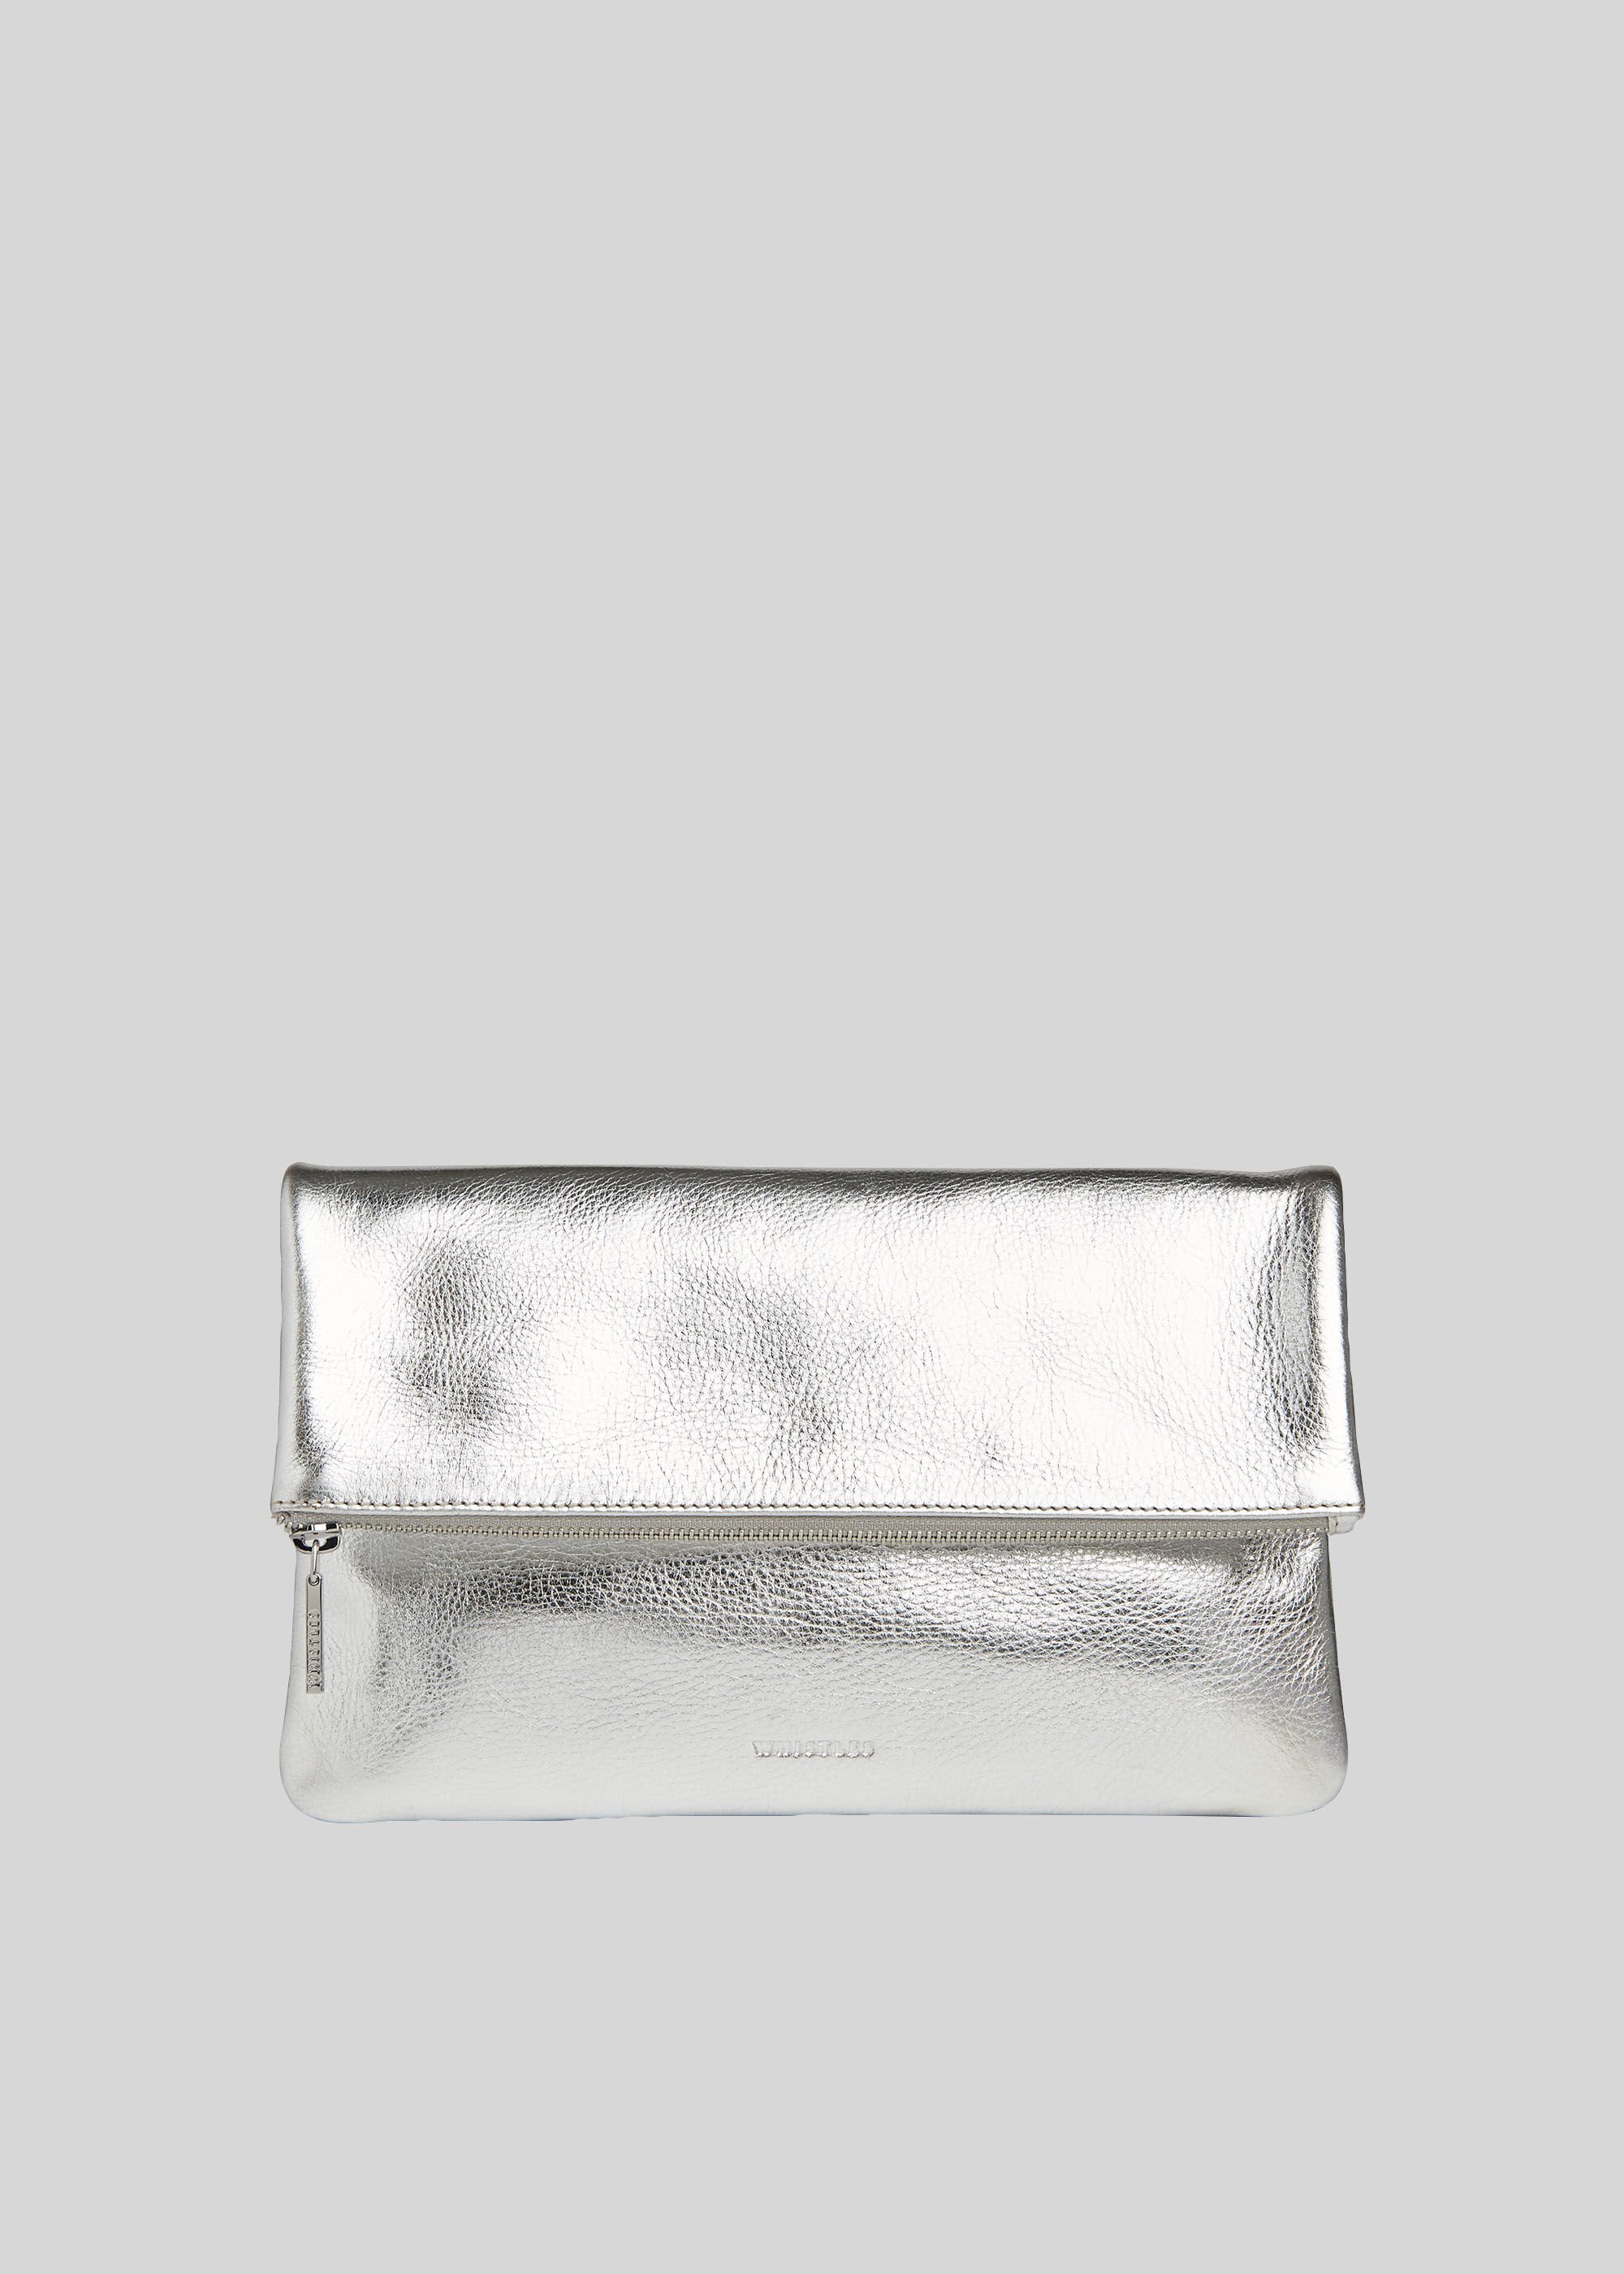 whistles clutch bag